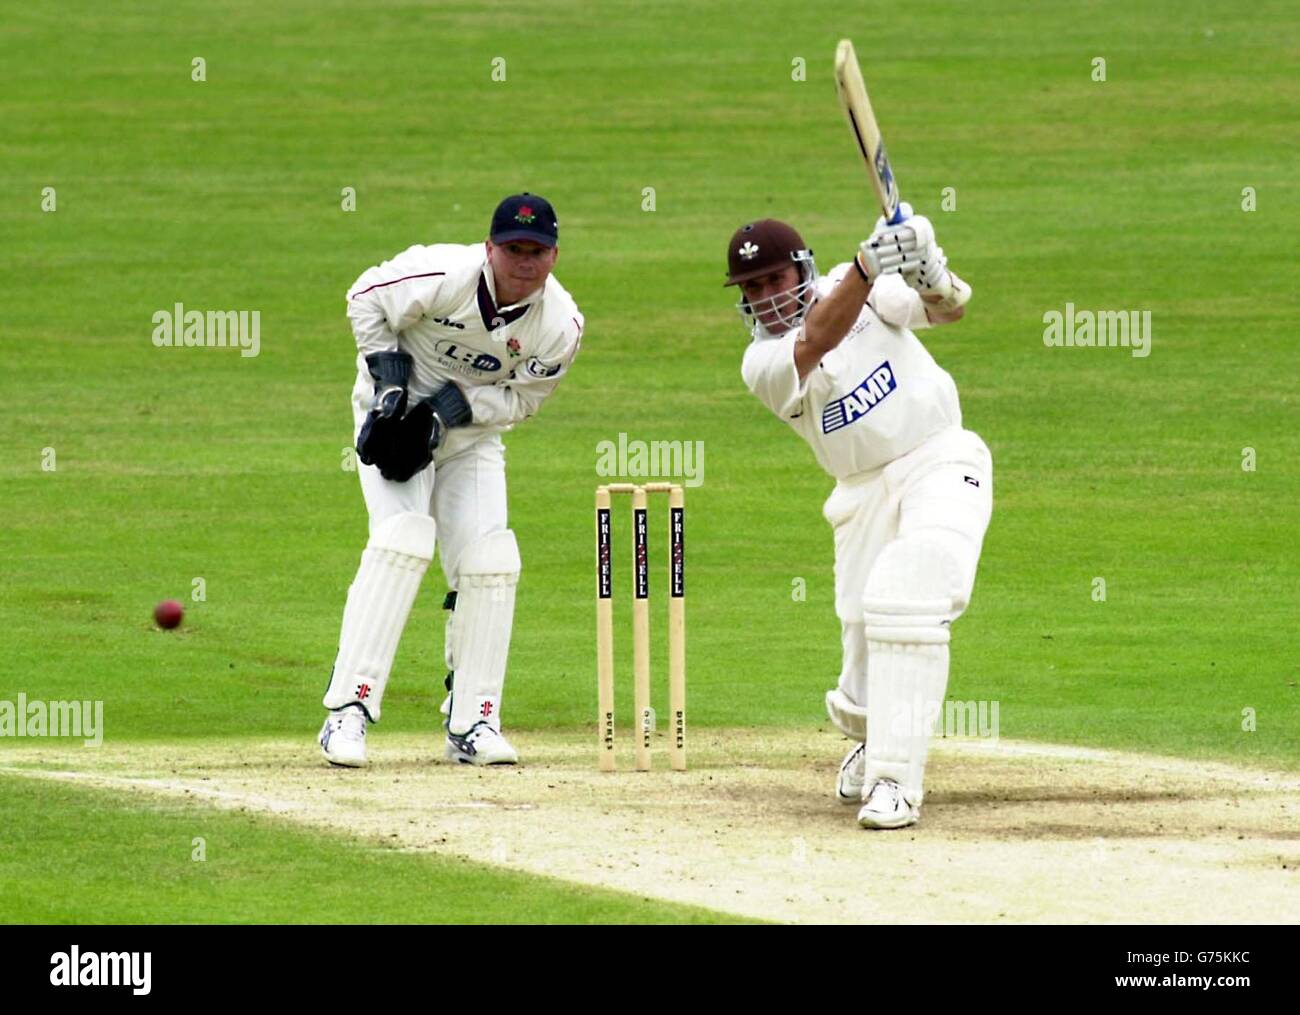 Surrey's Alec Stewart, who was today called up for the England test squad to play against Sri Lanka, drives a ball from Mark Chilton, Lancashire bowler, to David Byers Lancashire, and is out for 46 runs in the Frizzell County Championship Division One at The Oval, London. Stock Photo